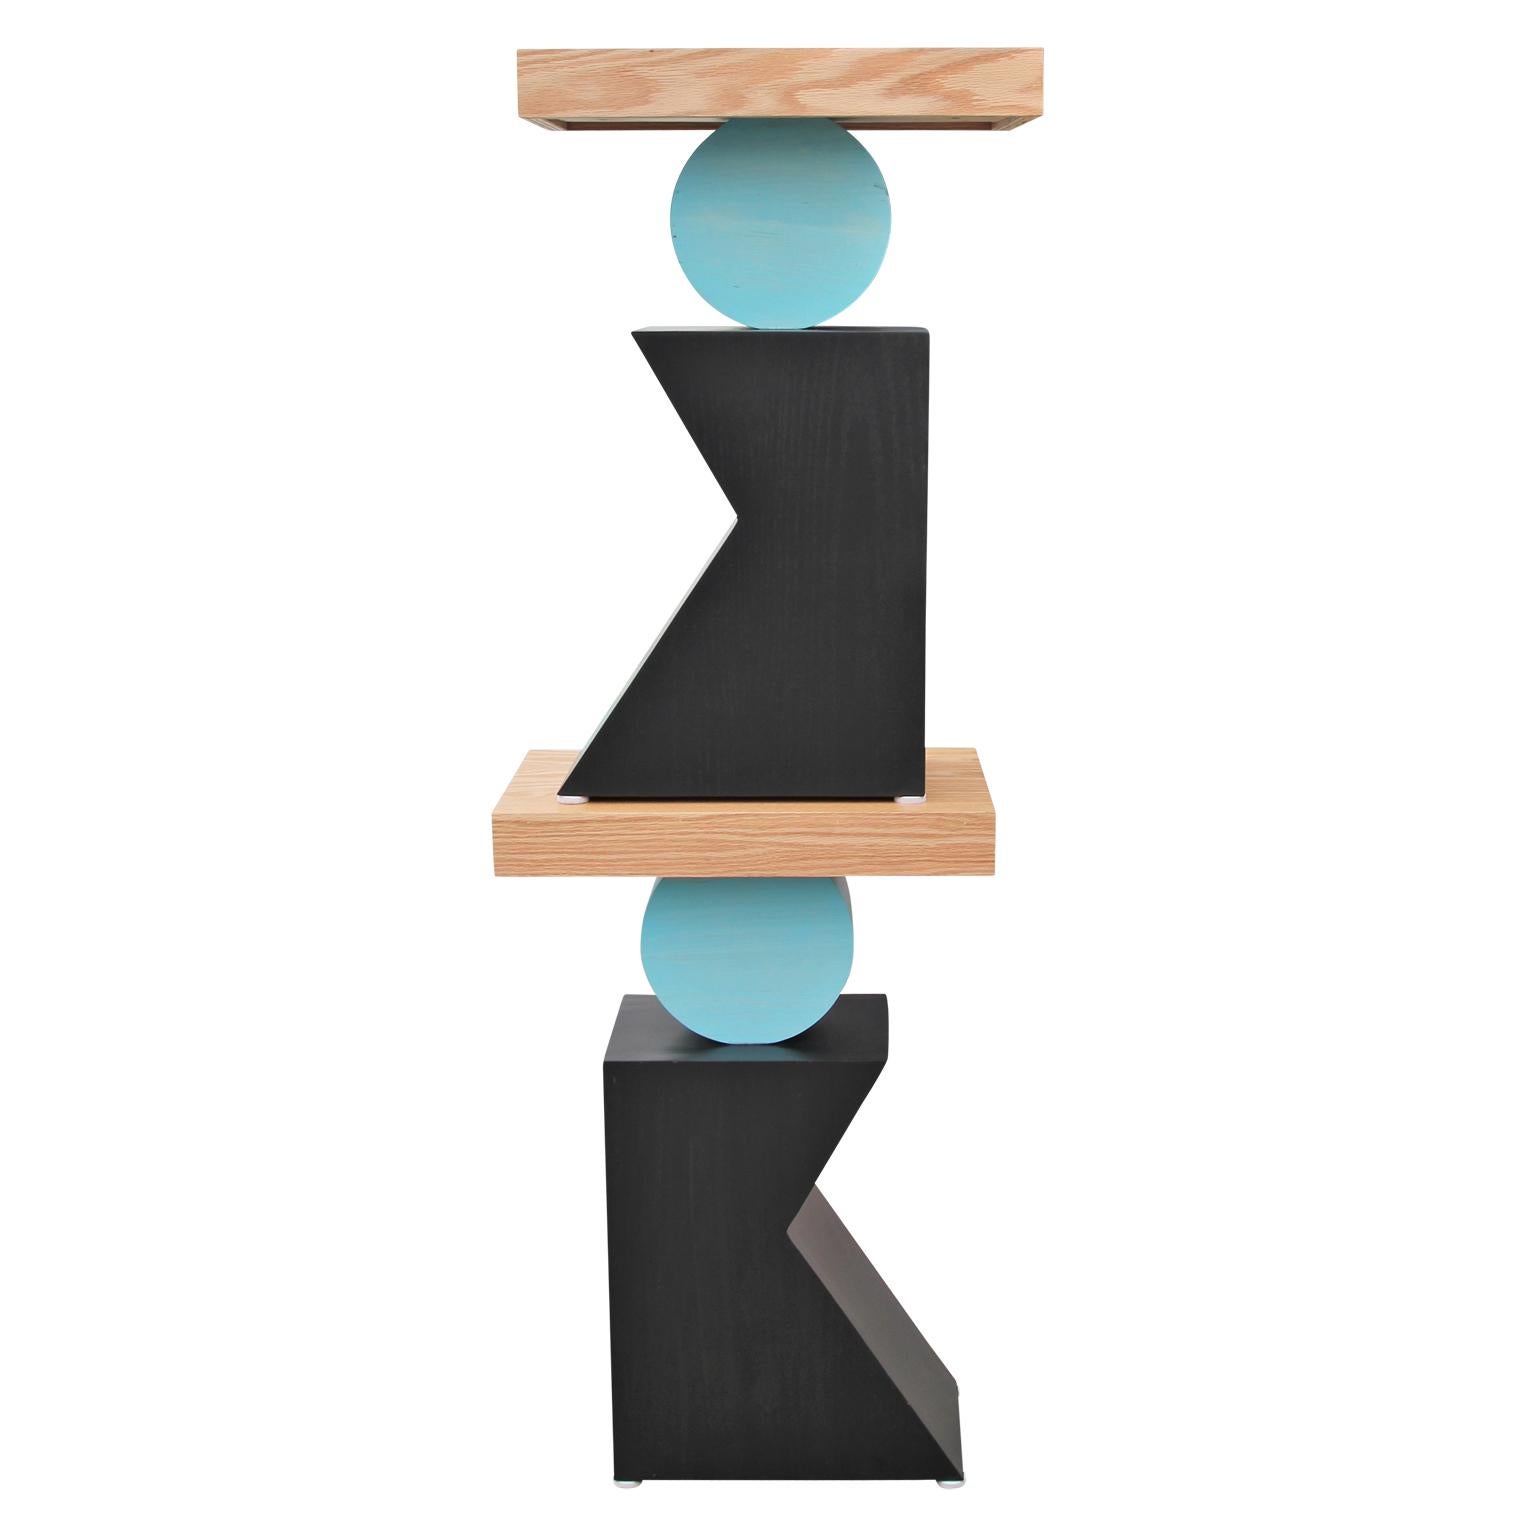 Pair of custom post-modern geometric side tables in blue, black, and natural. The two pictured are available for immediate sale, but custom made to order options are available.